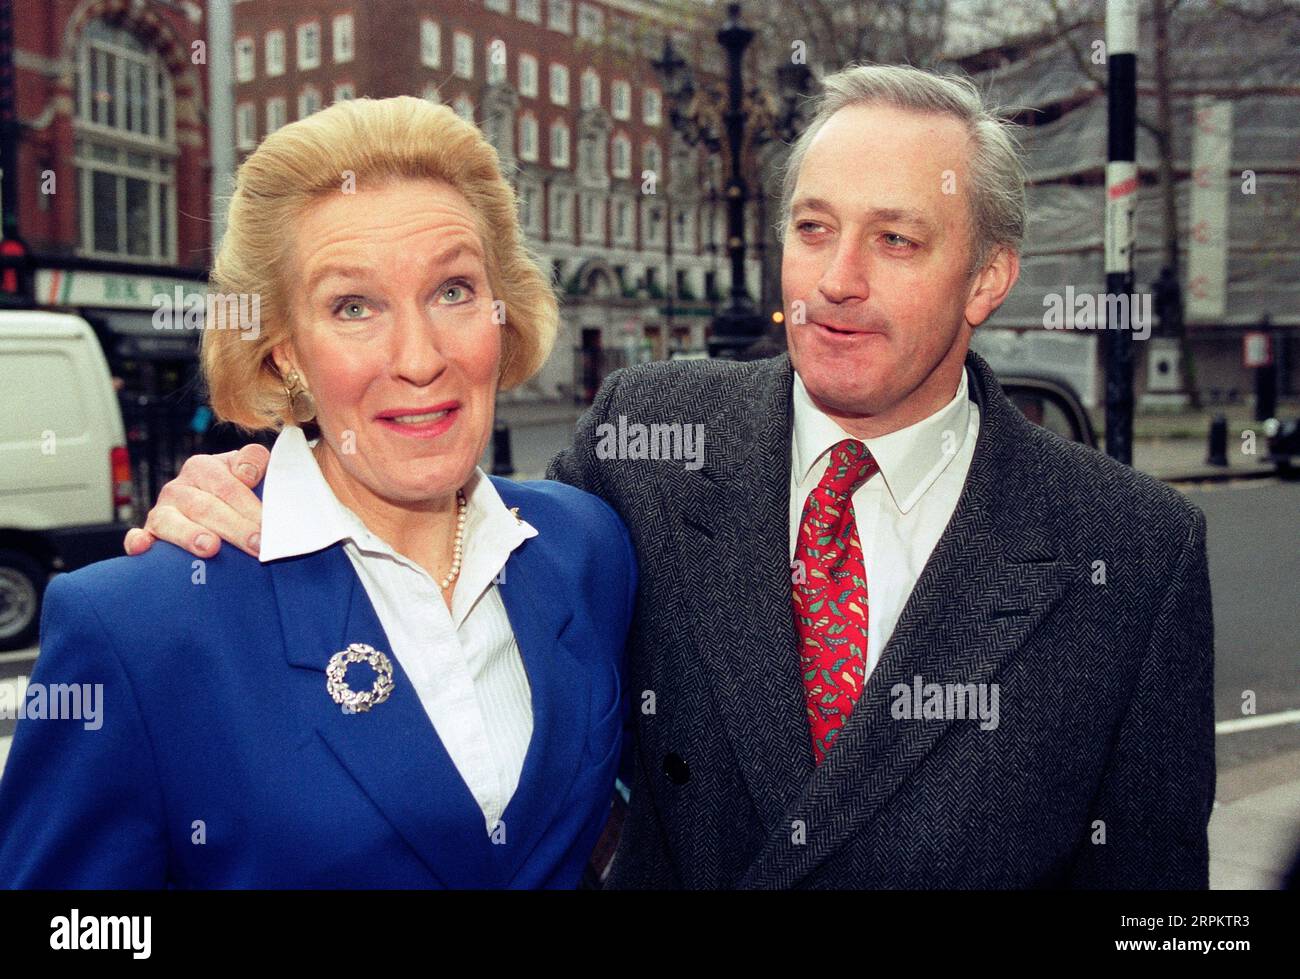 Neil Hamilton at the High Court with wife Christine where he lost his libel case against Mohamed Al Fayed over 'cash for questions', 14th November '99 Stock Photo